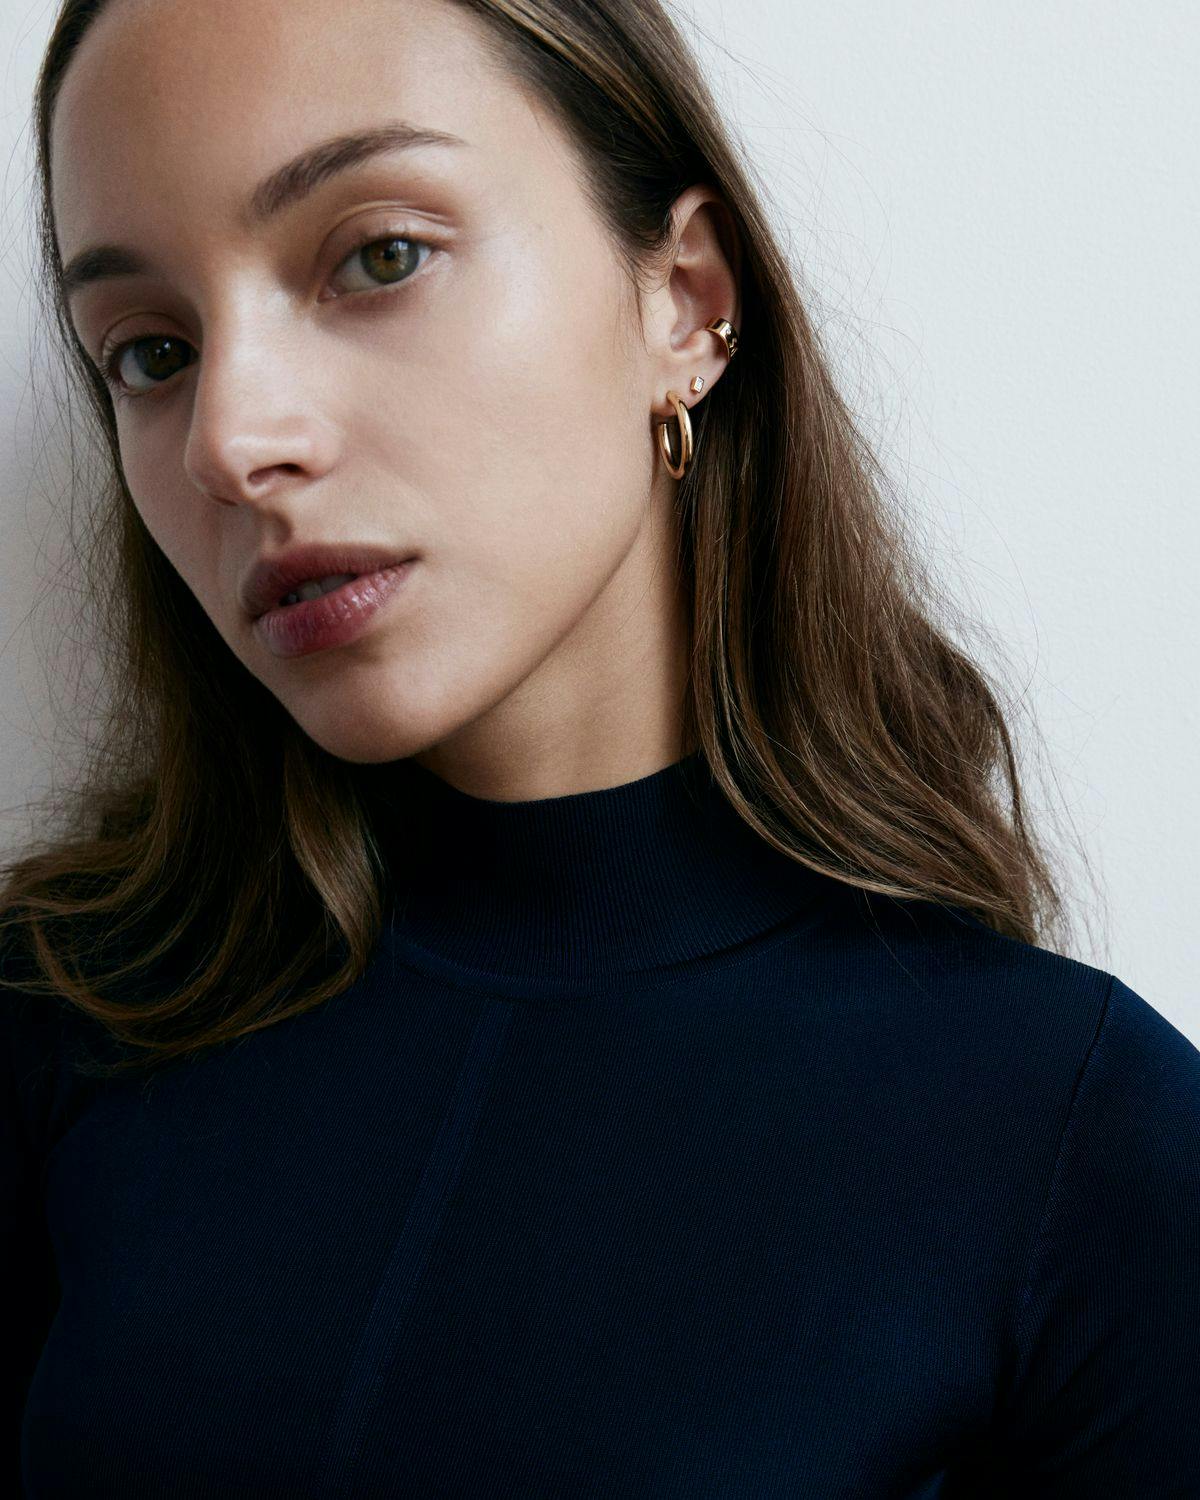 Model wearing gold hoops, diamond studs, and a gold cuff.